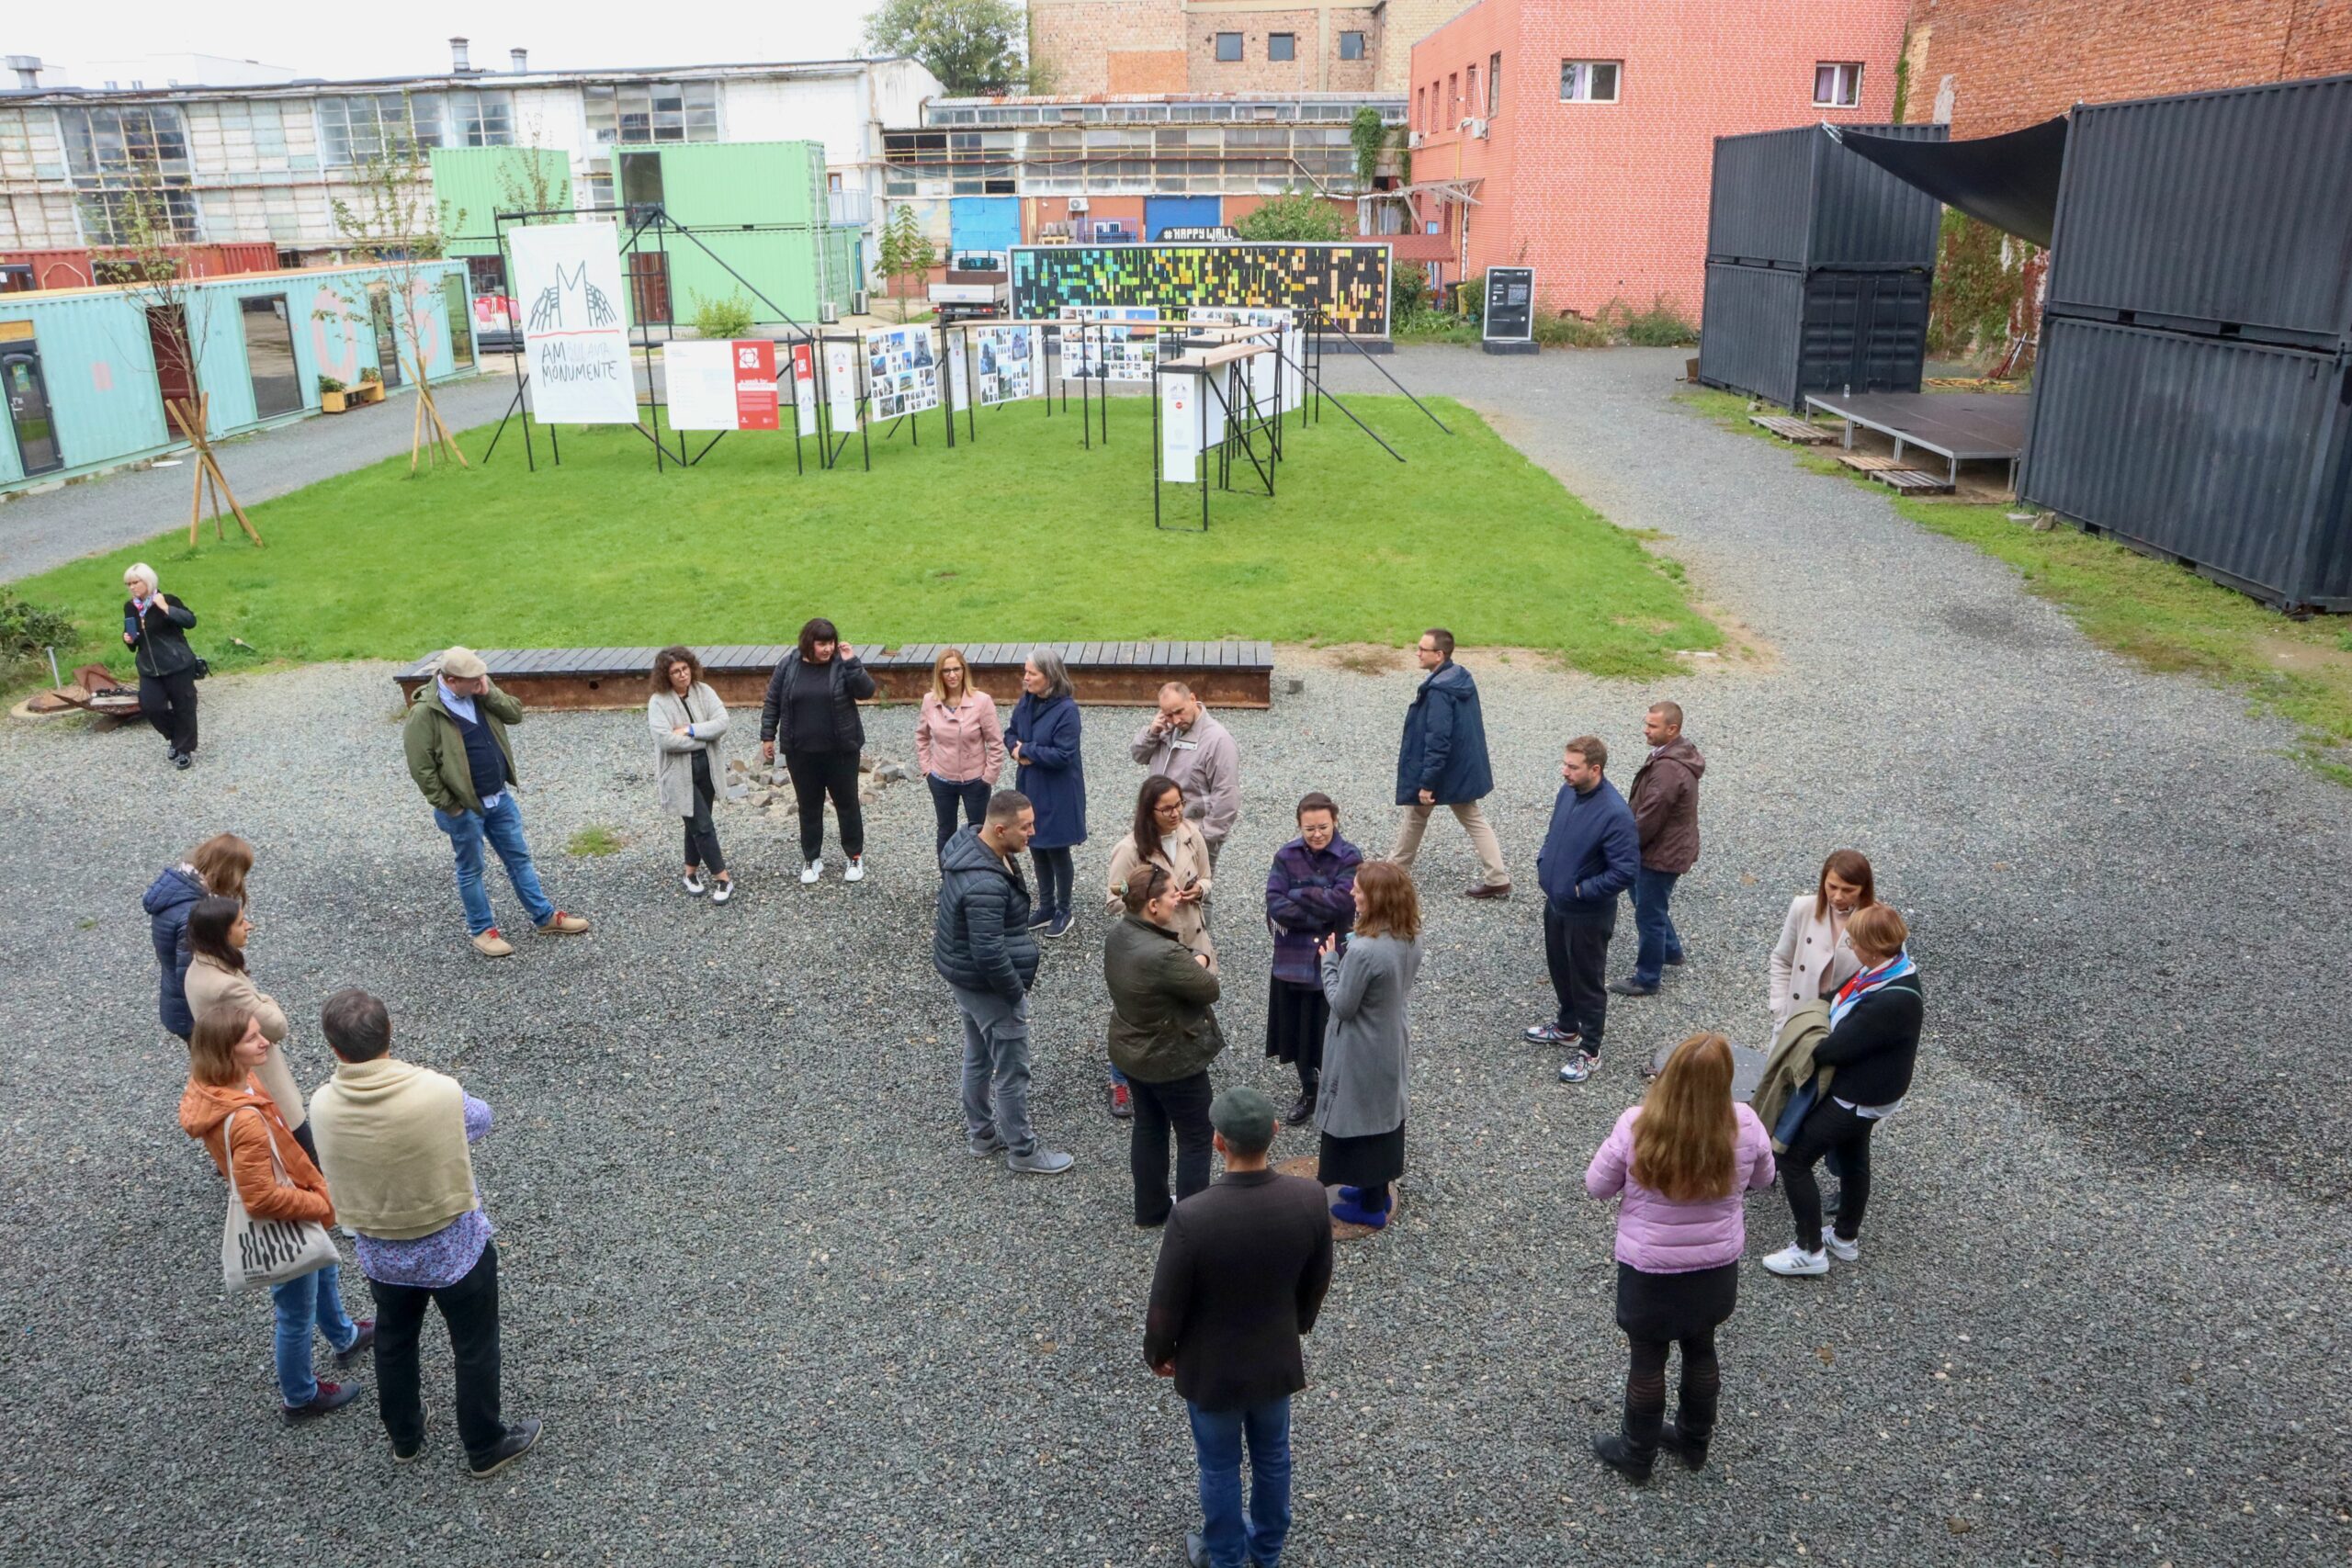 WORKSHOP: BUILDING CREATIVE CENTERS IN THE CITIES